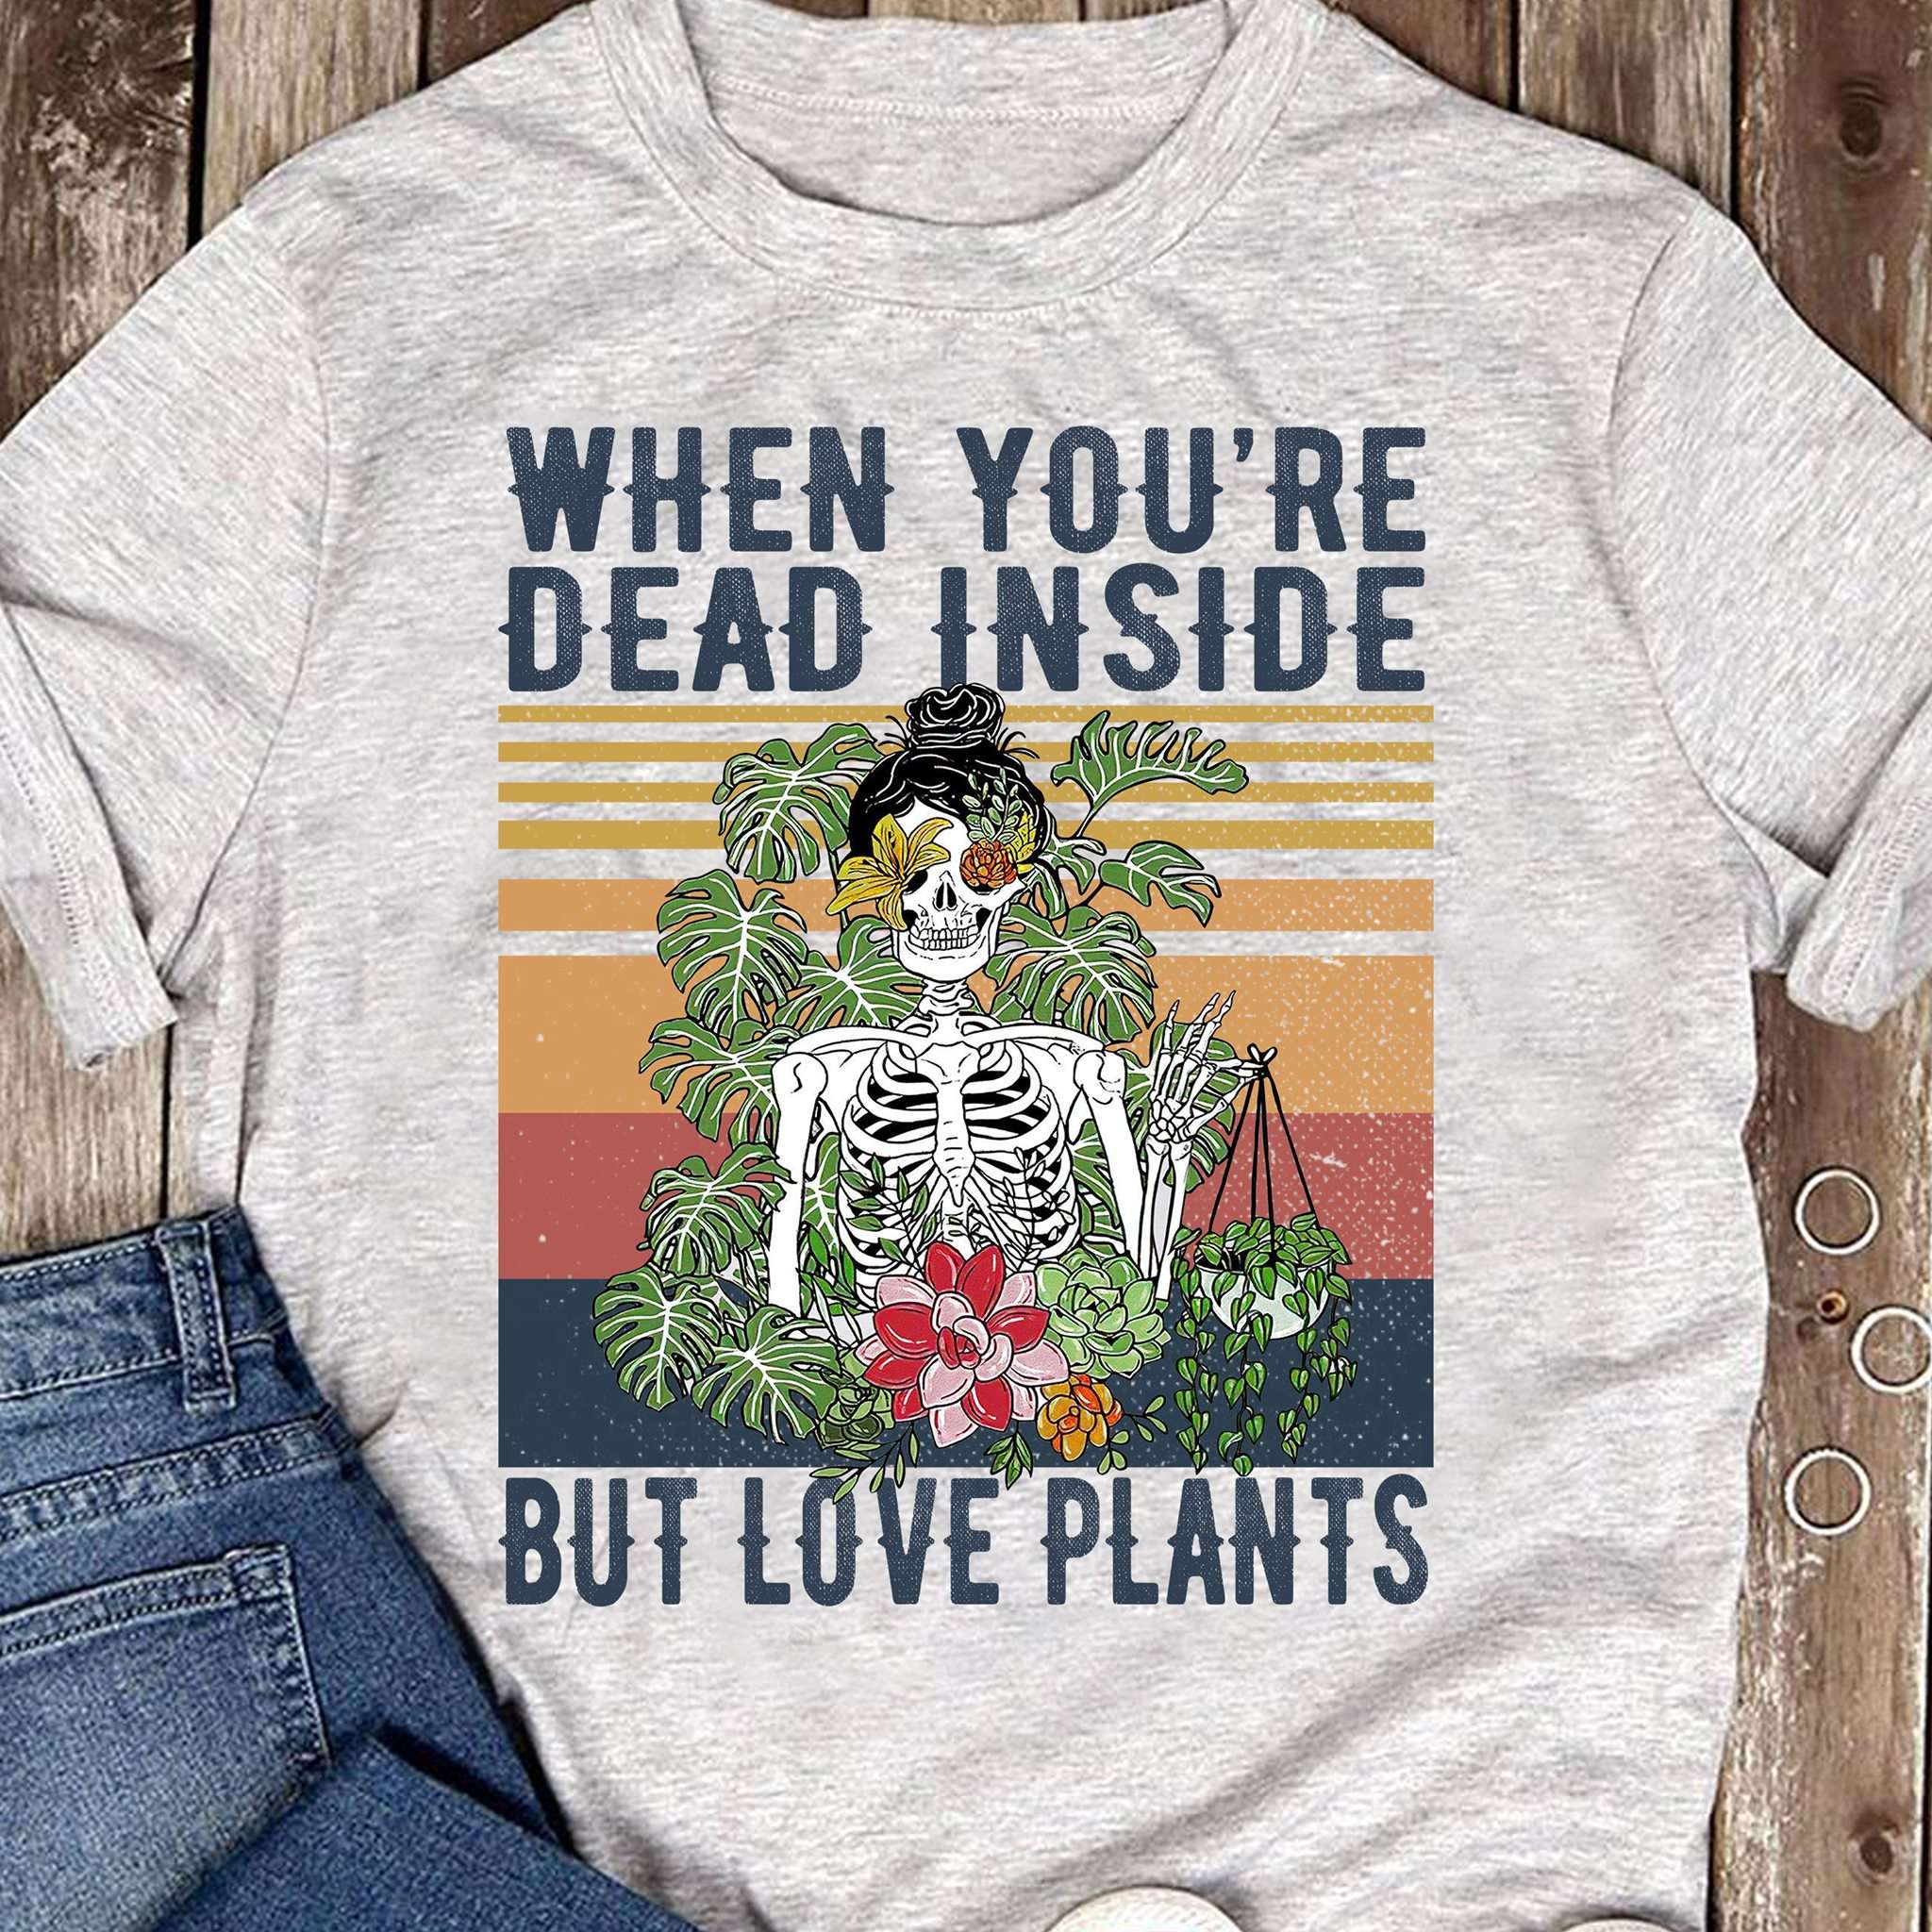 When you're dead inside but love plants - Skull girl love plants, gift for plant person